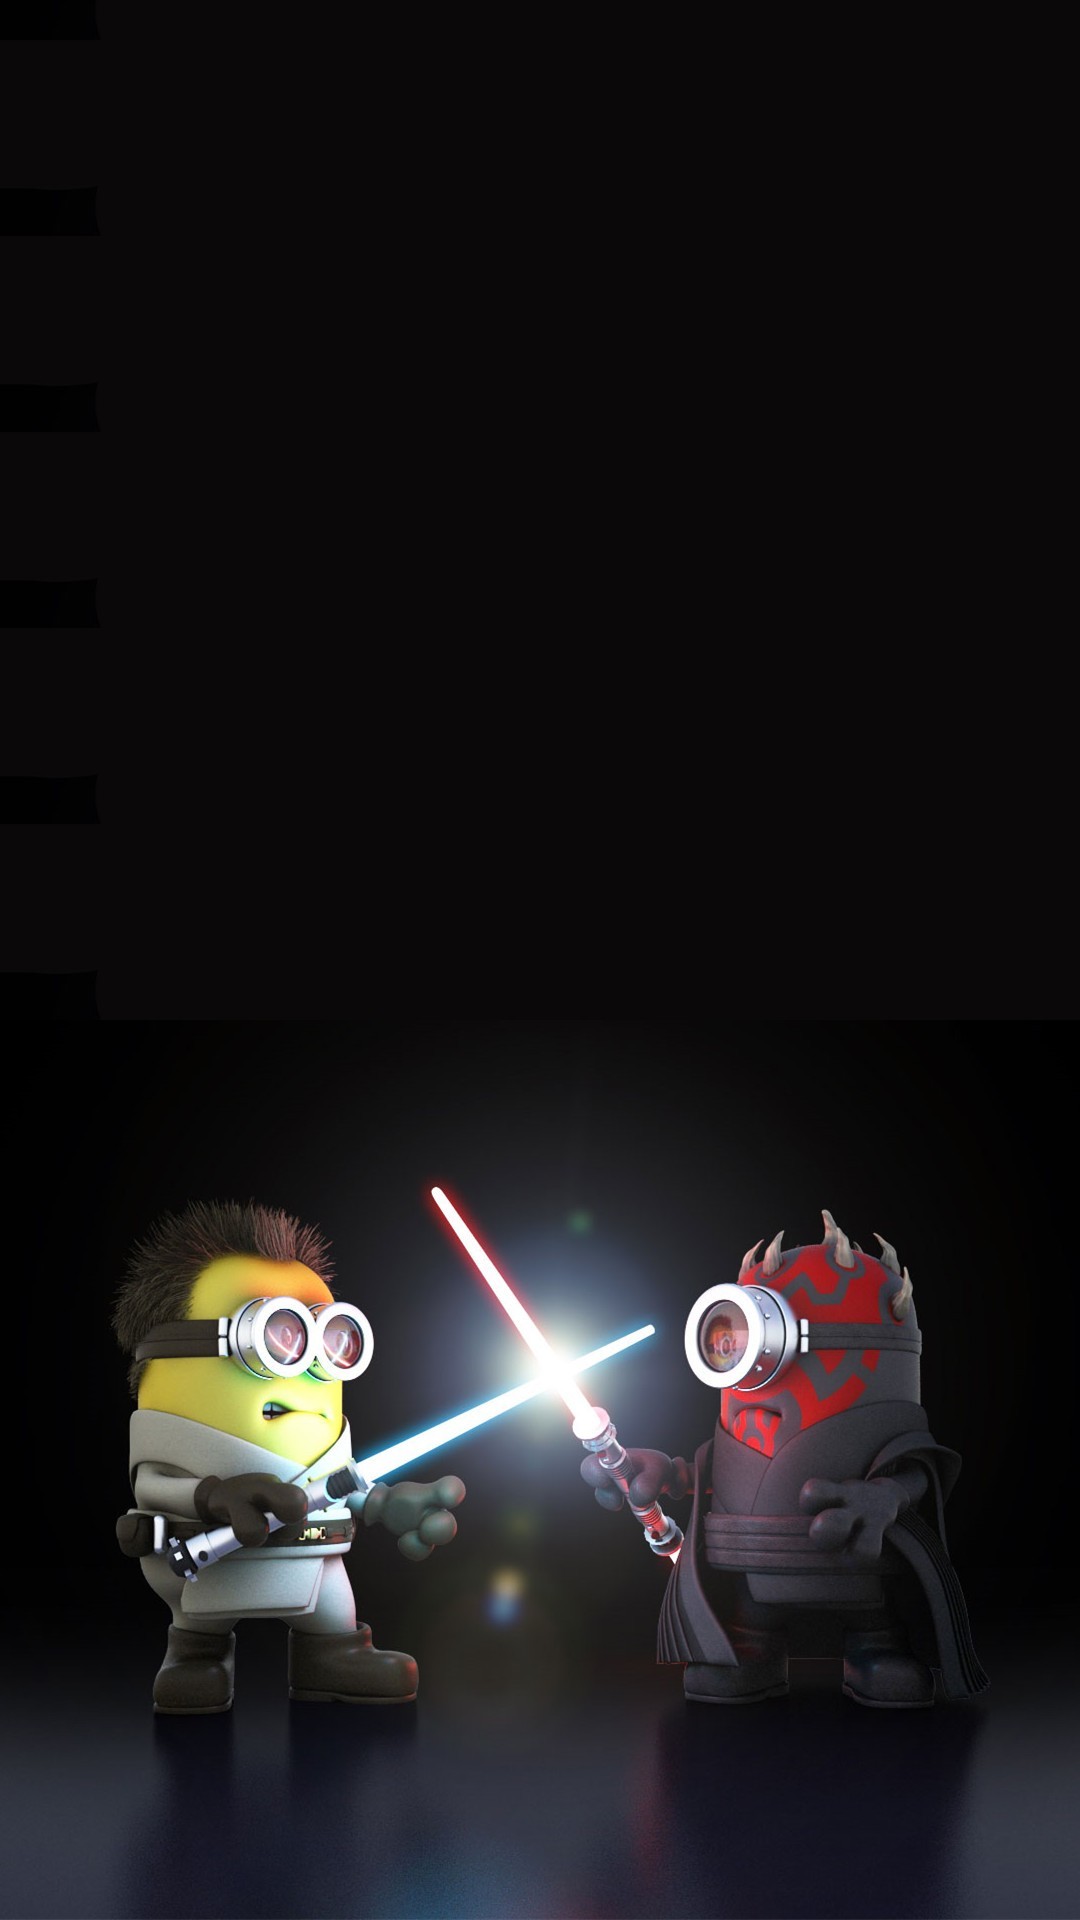 Vamers – Artistry – Fandom – Minion Wars Feel the Force – Star Wars and Despicable Me Mash Up – Minion Obi Wan versus Darth Maul